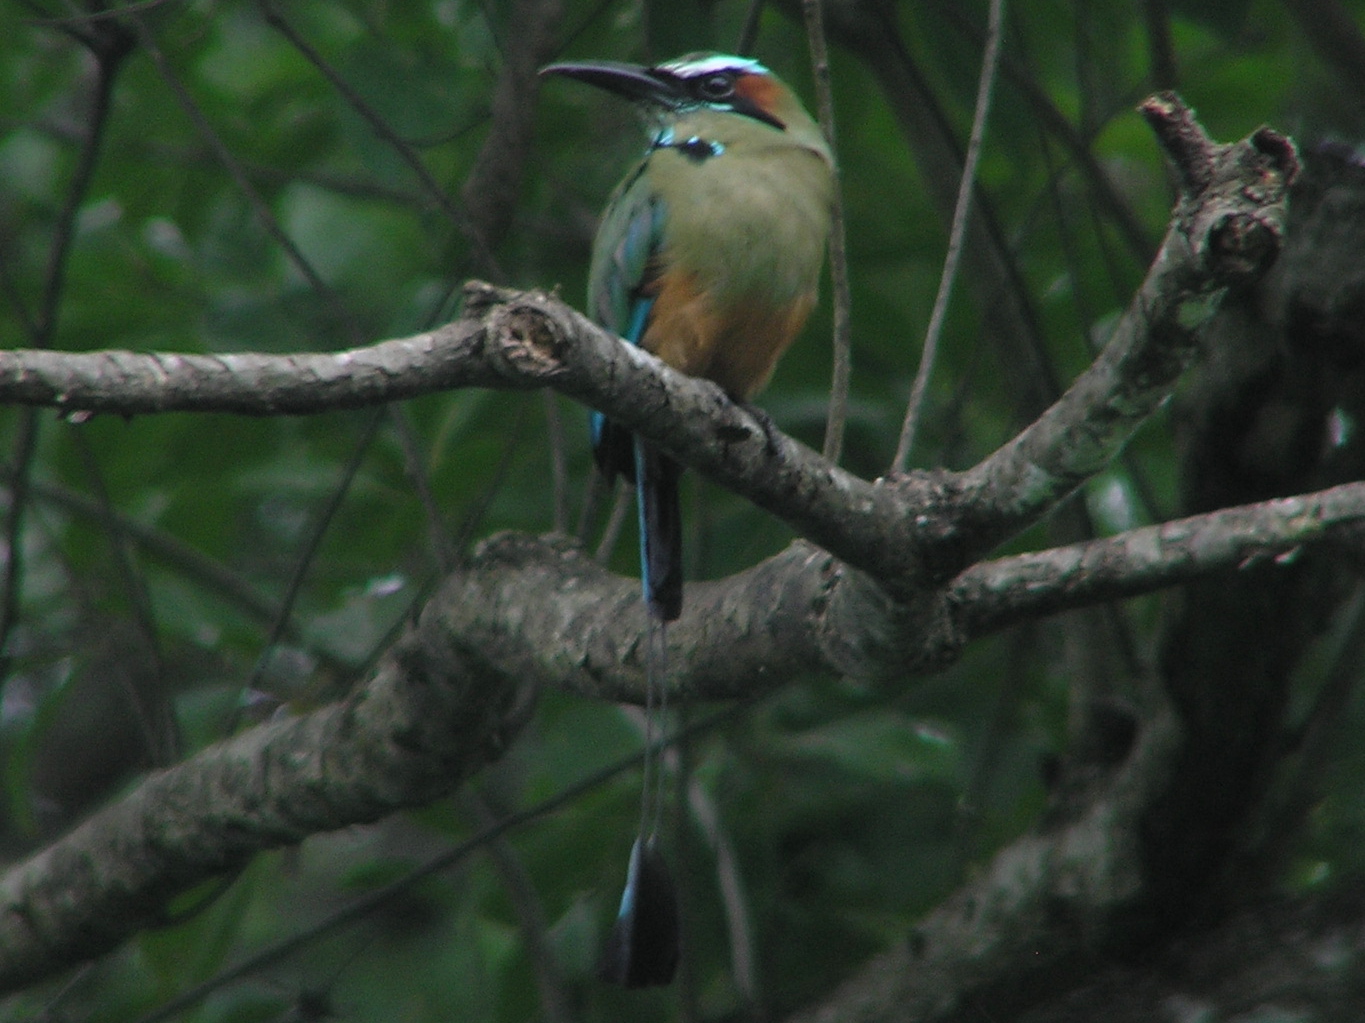 Click picture to see more Turquoise-browed Motmot photos.